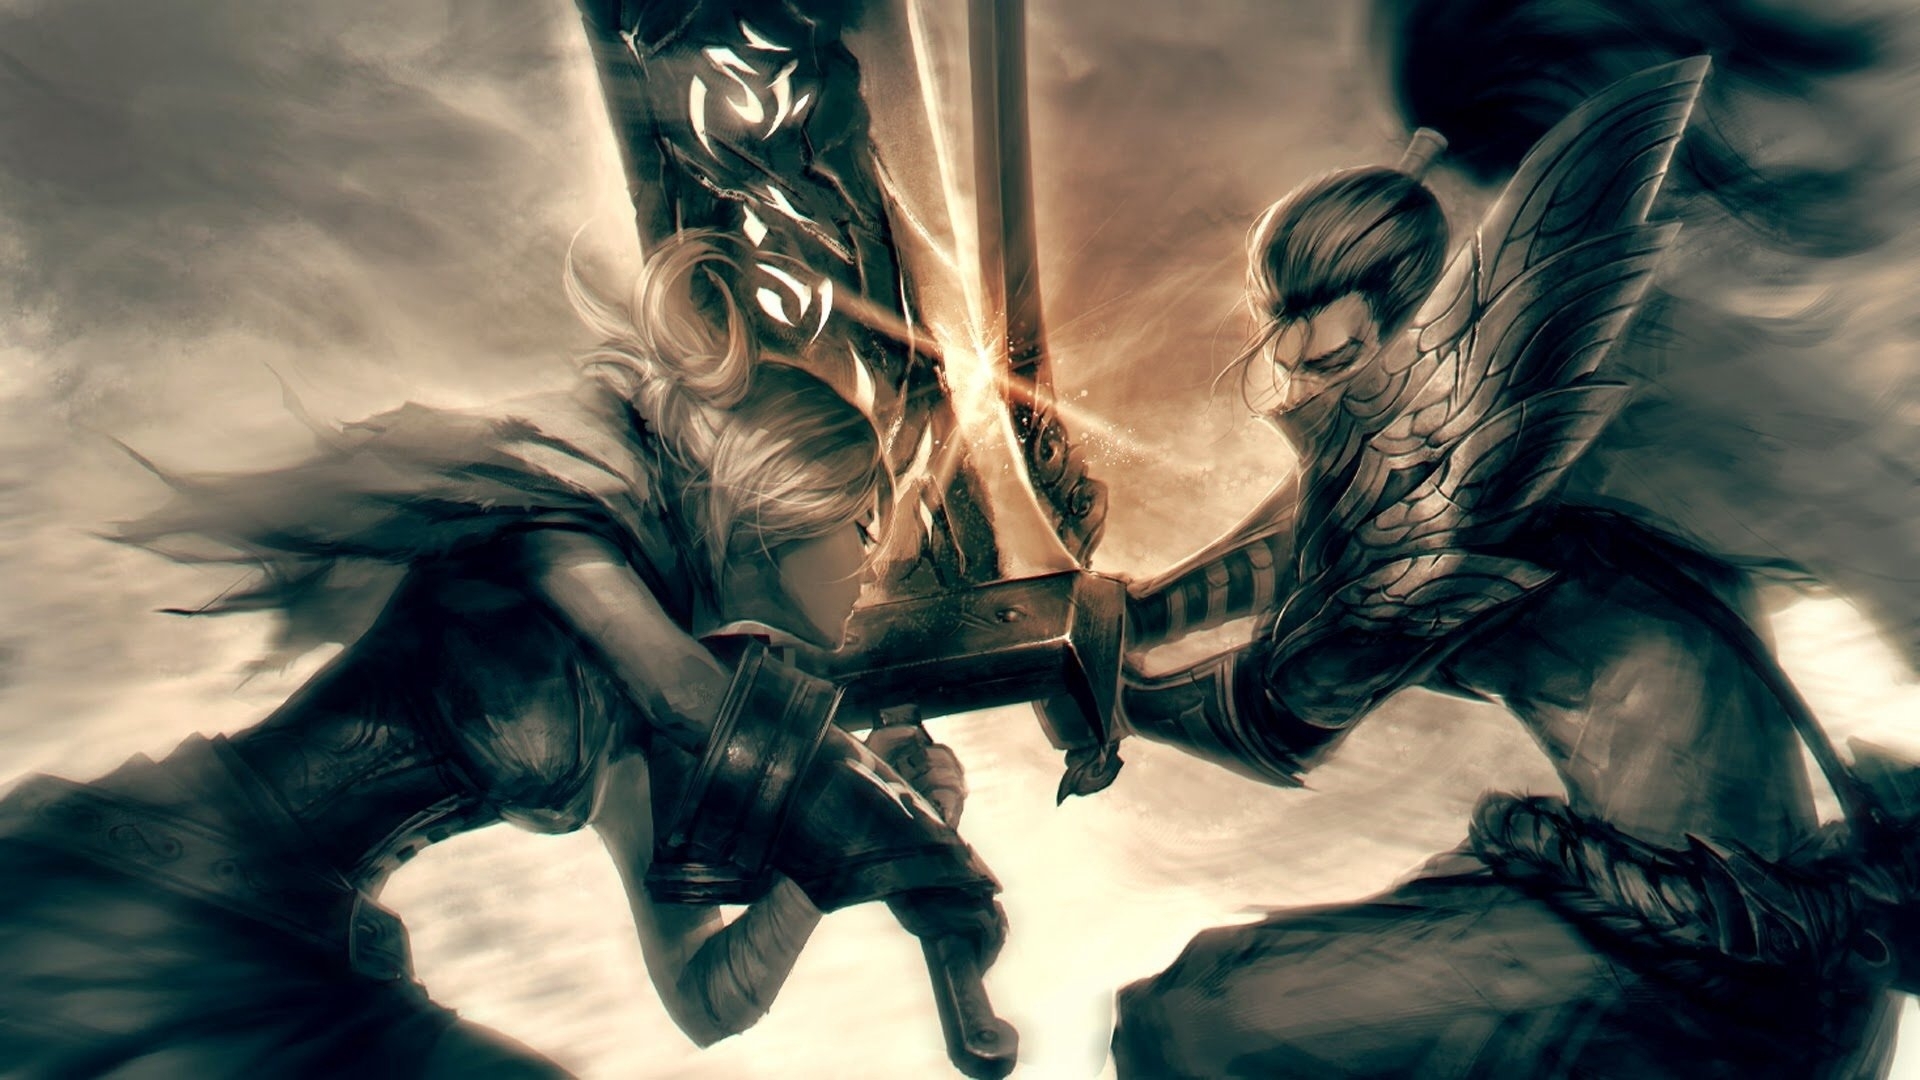 10 Top League Of Legends Wallpaper Hd 1920X1080 FULL HD 1080p For PC Background